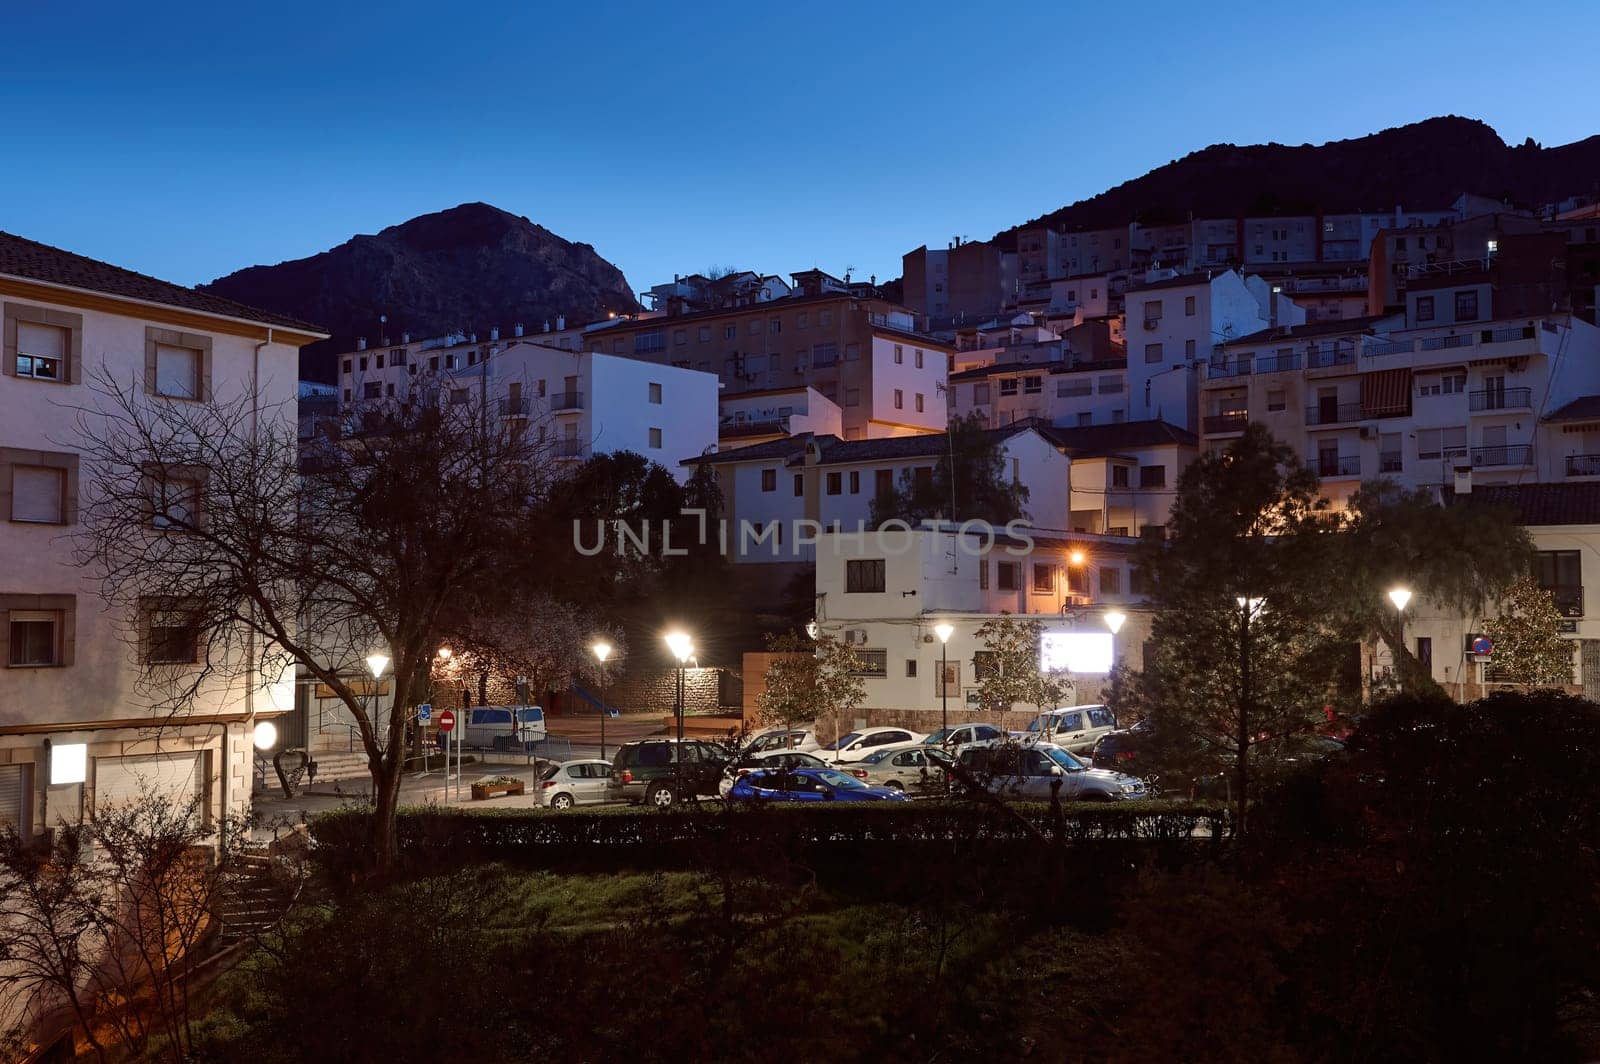 View of medieval Spanish city Quesada in province of Jaen in Andalusia, illuminated with street lights in the evening. Lifestyle, Travel and tourism concept. Discovering famous historic places. Spain